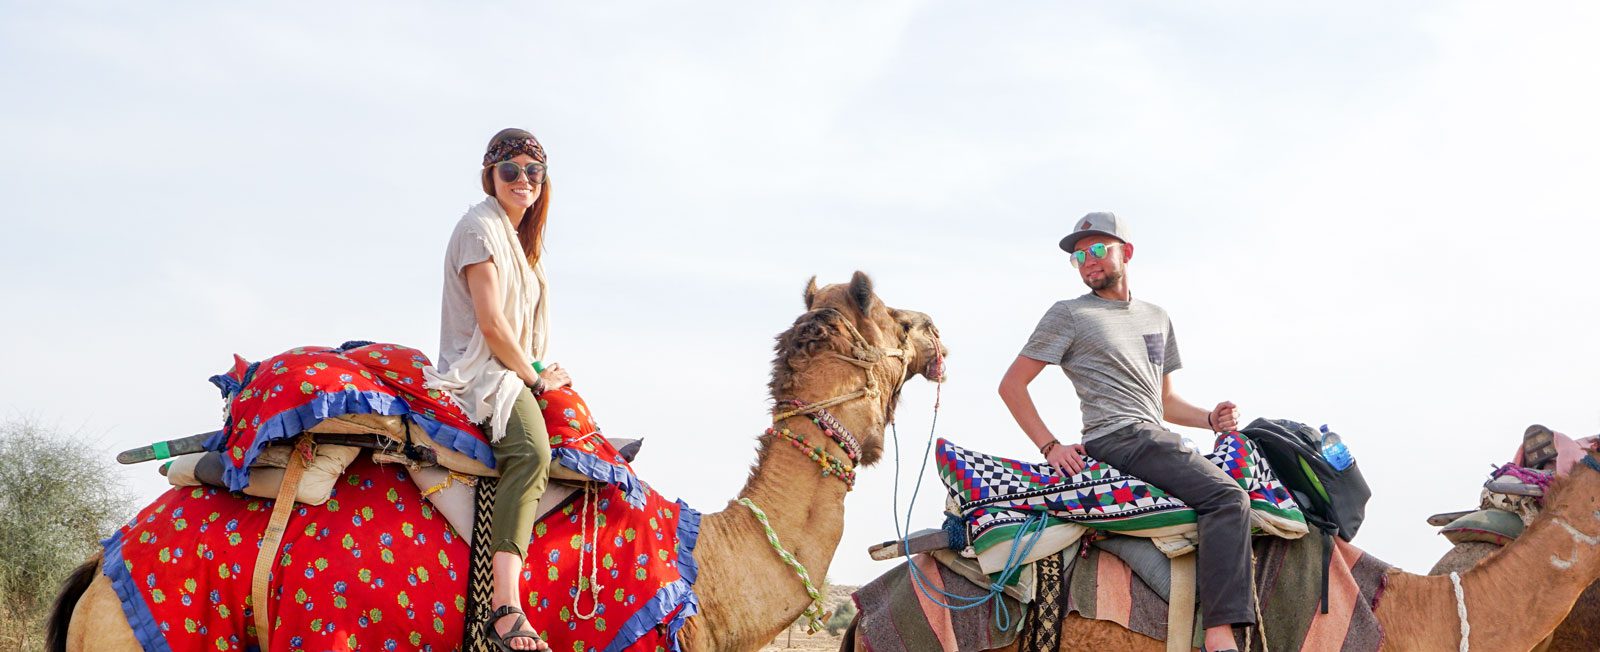 EWU alumni couple riding camels in the desert of India